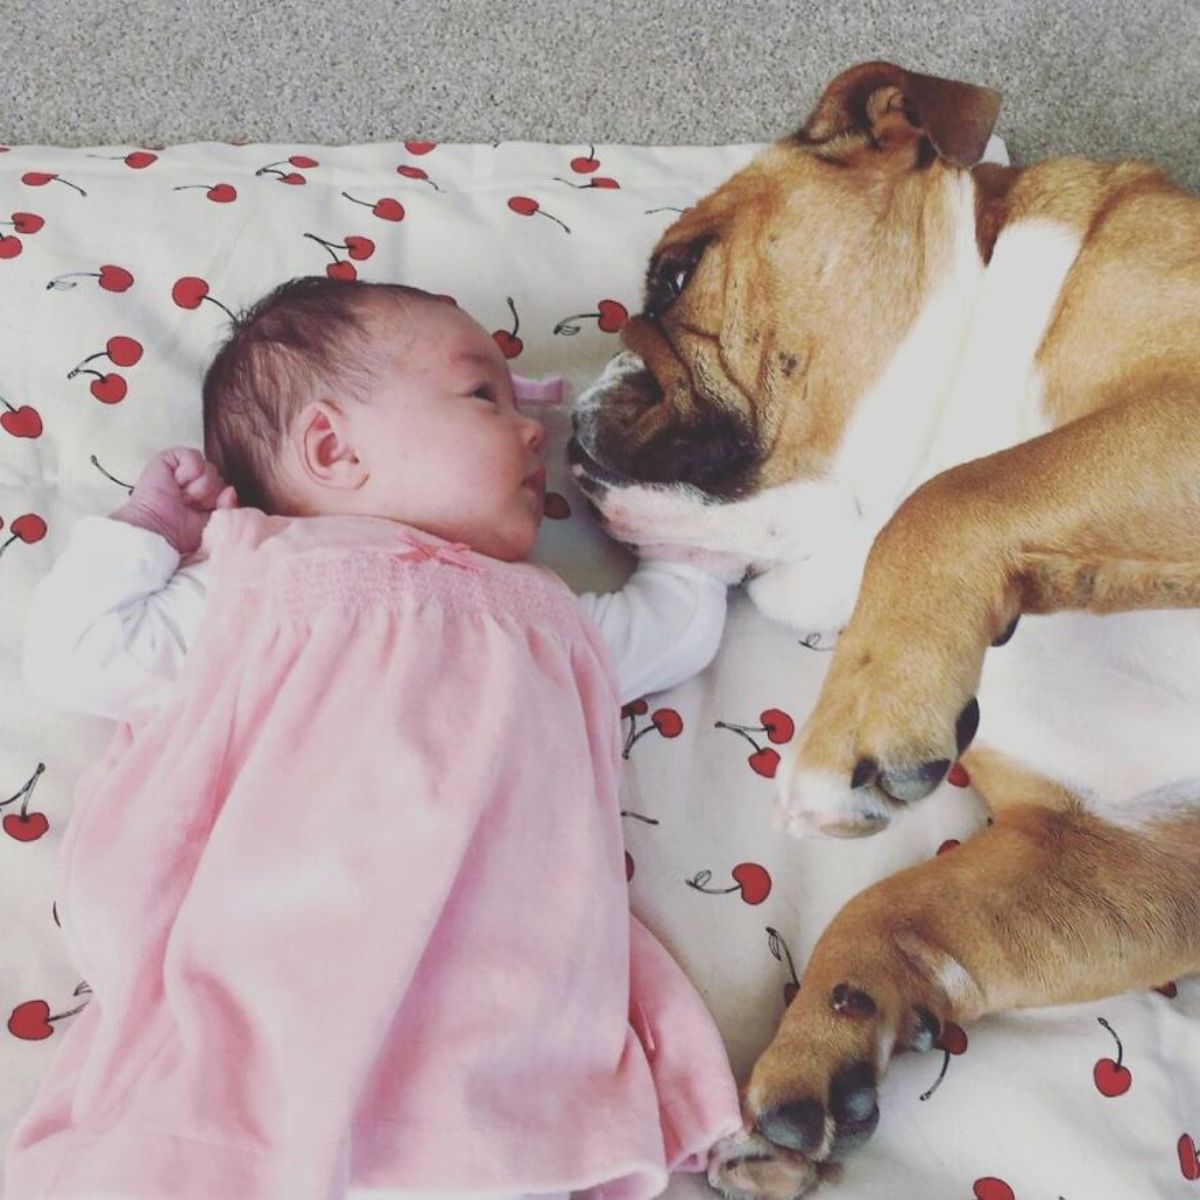 brown and white bulldog laying next to a baby in pink